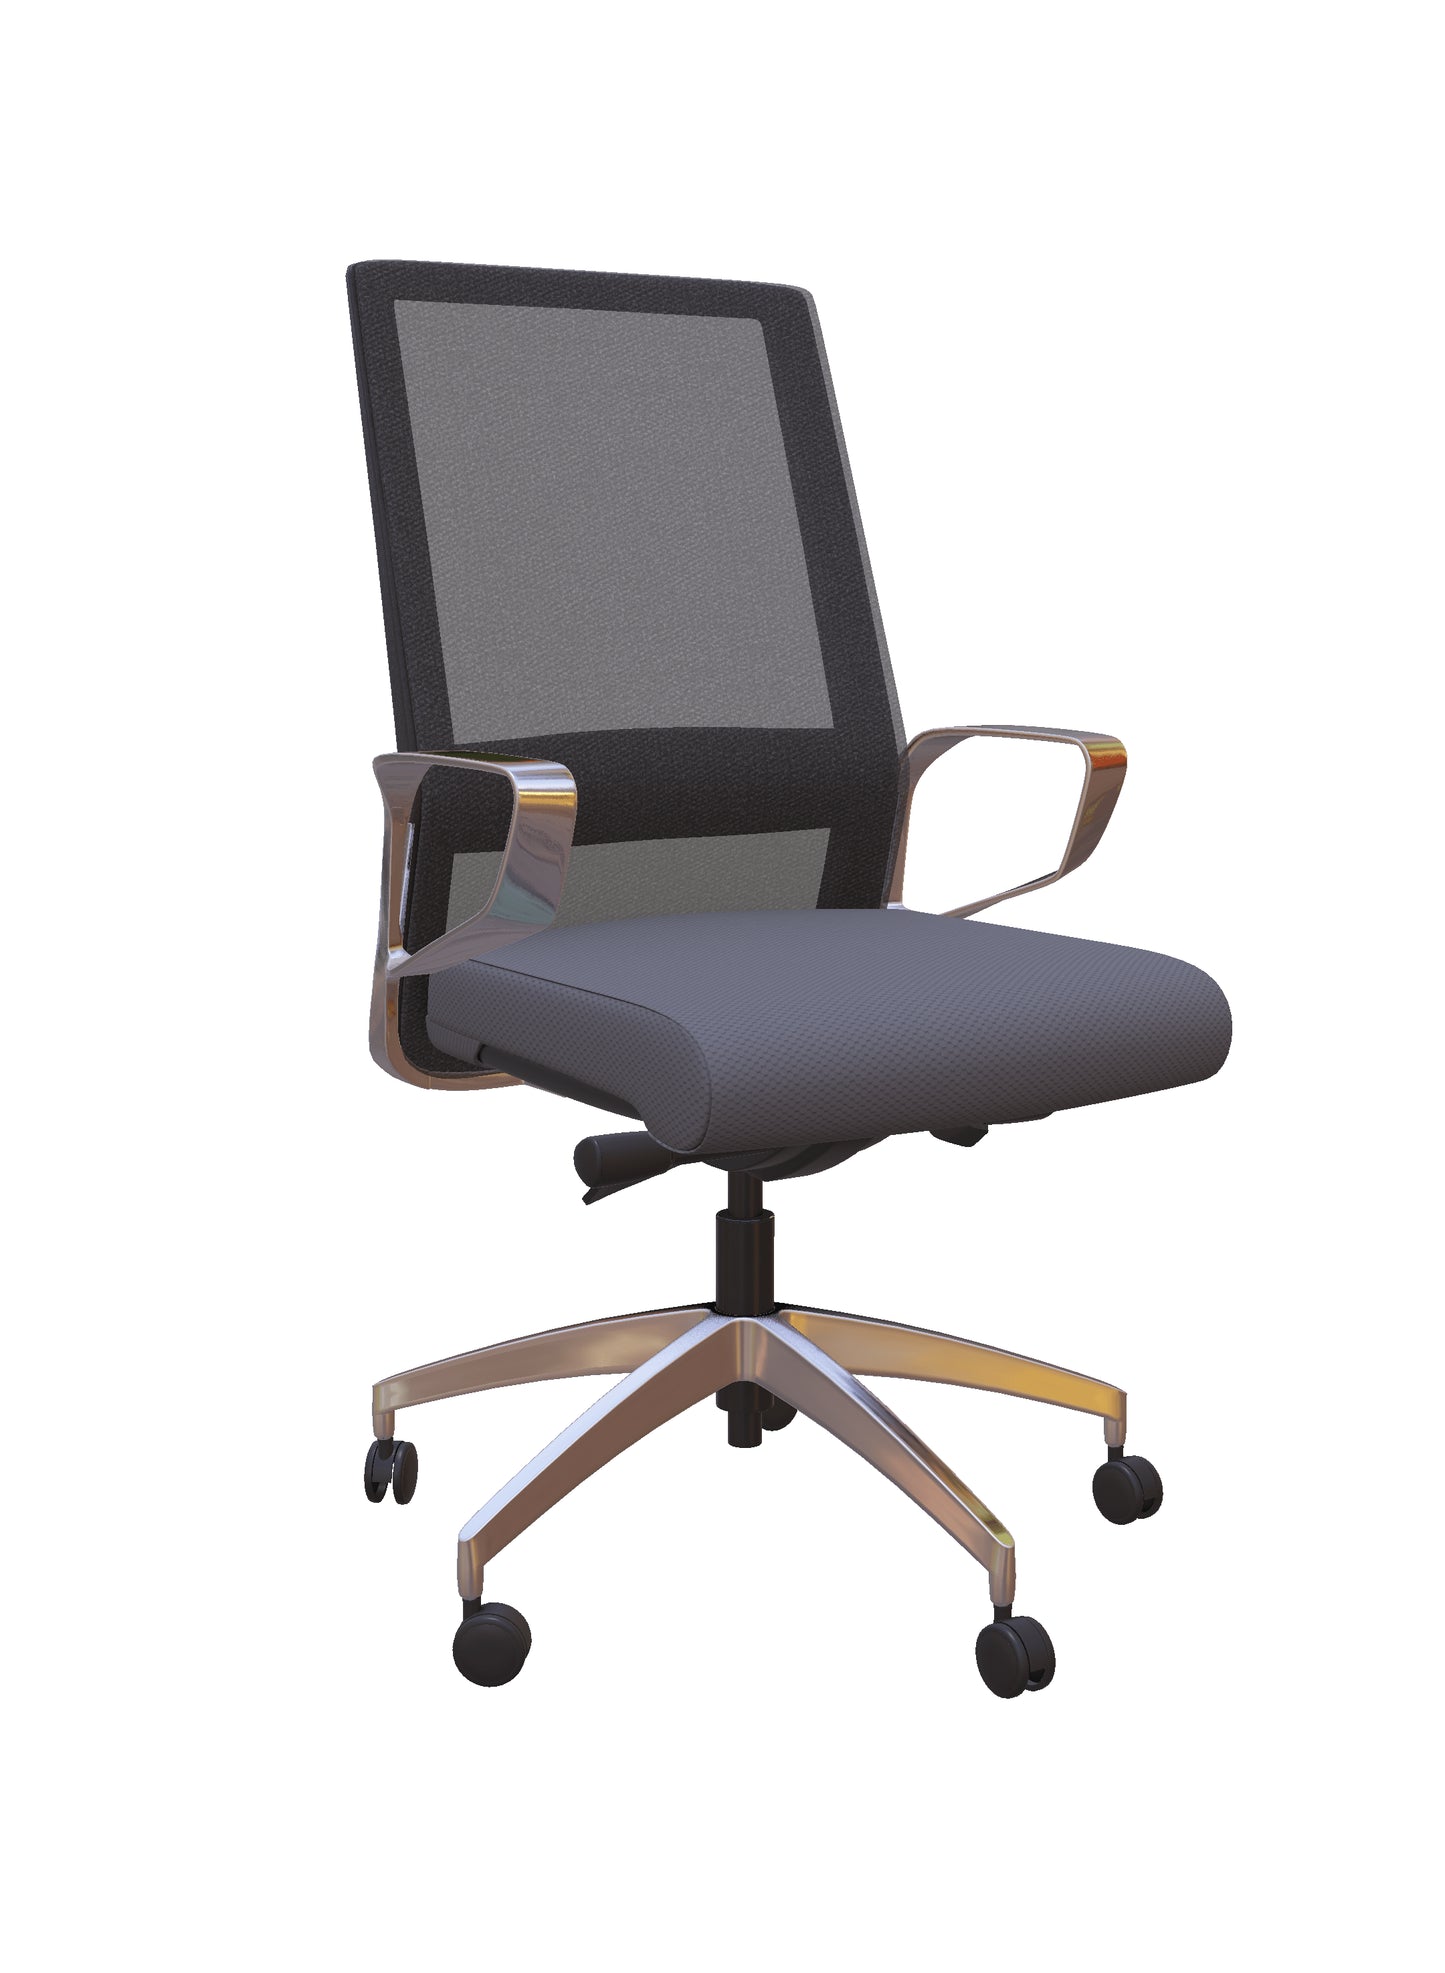 Freeride Grey Mesh-Back Conference Chair